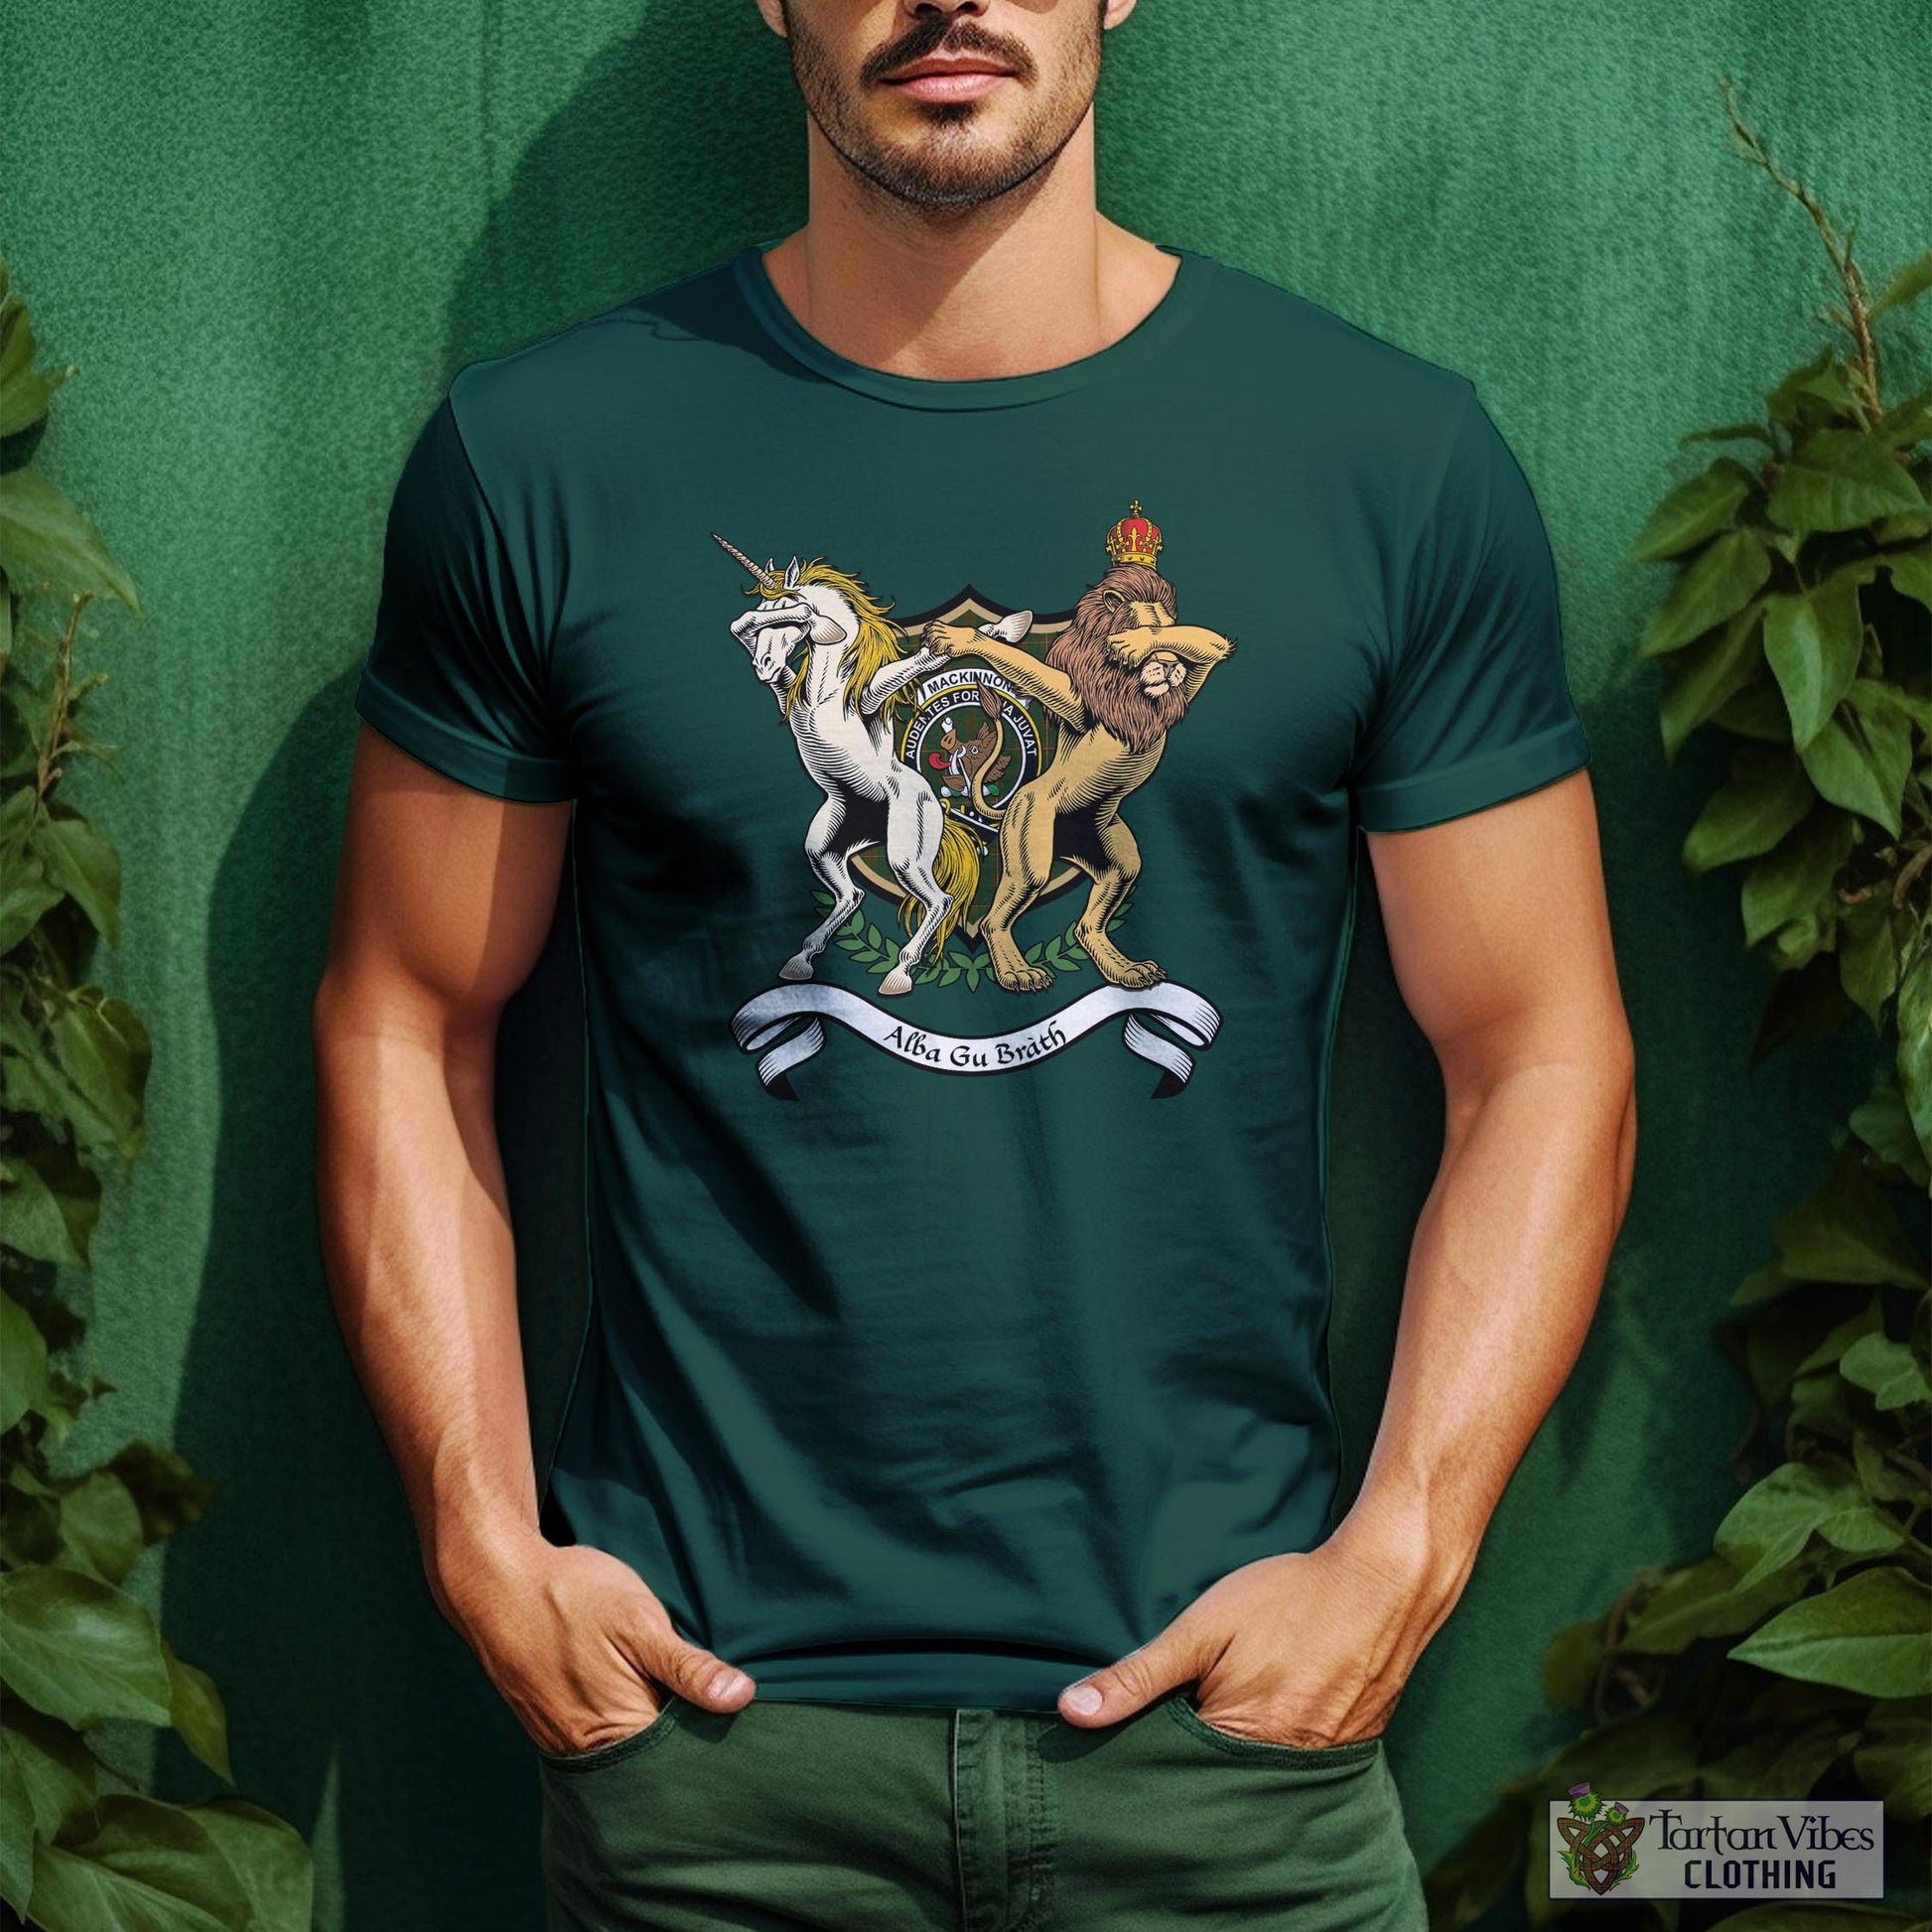 Tartan Vibes Clothing MacKinnon Hunting Family Crest Cotton Men's T-Shirt with Scotland Royal Coat Of Arm Funny Style